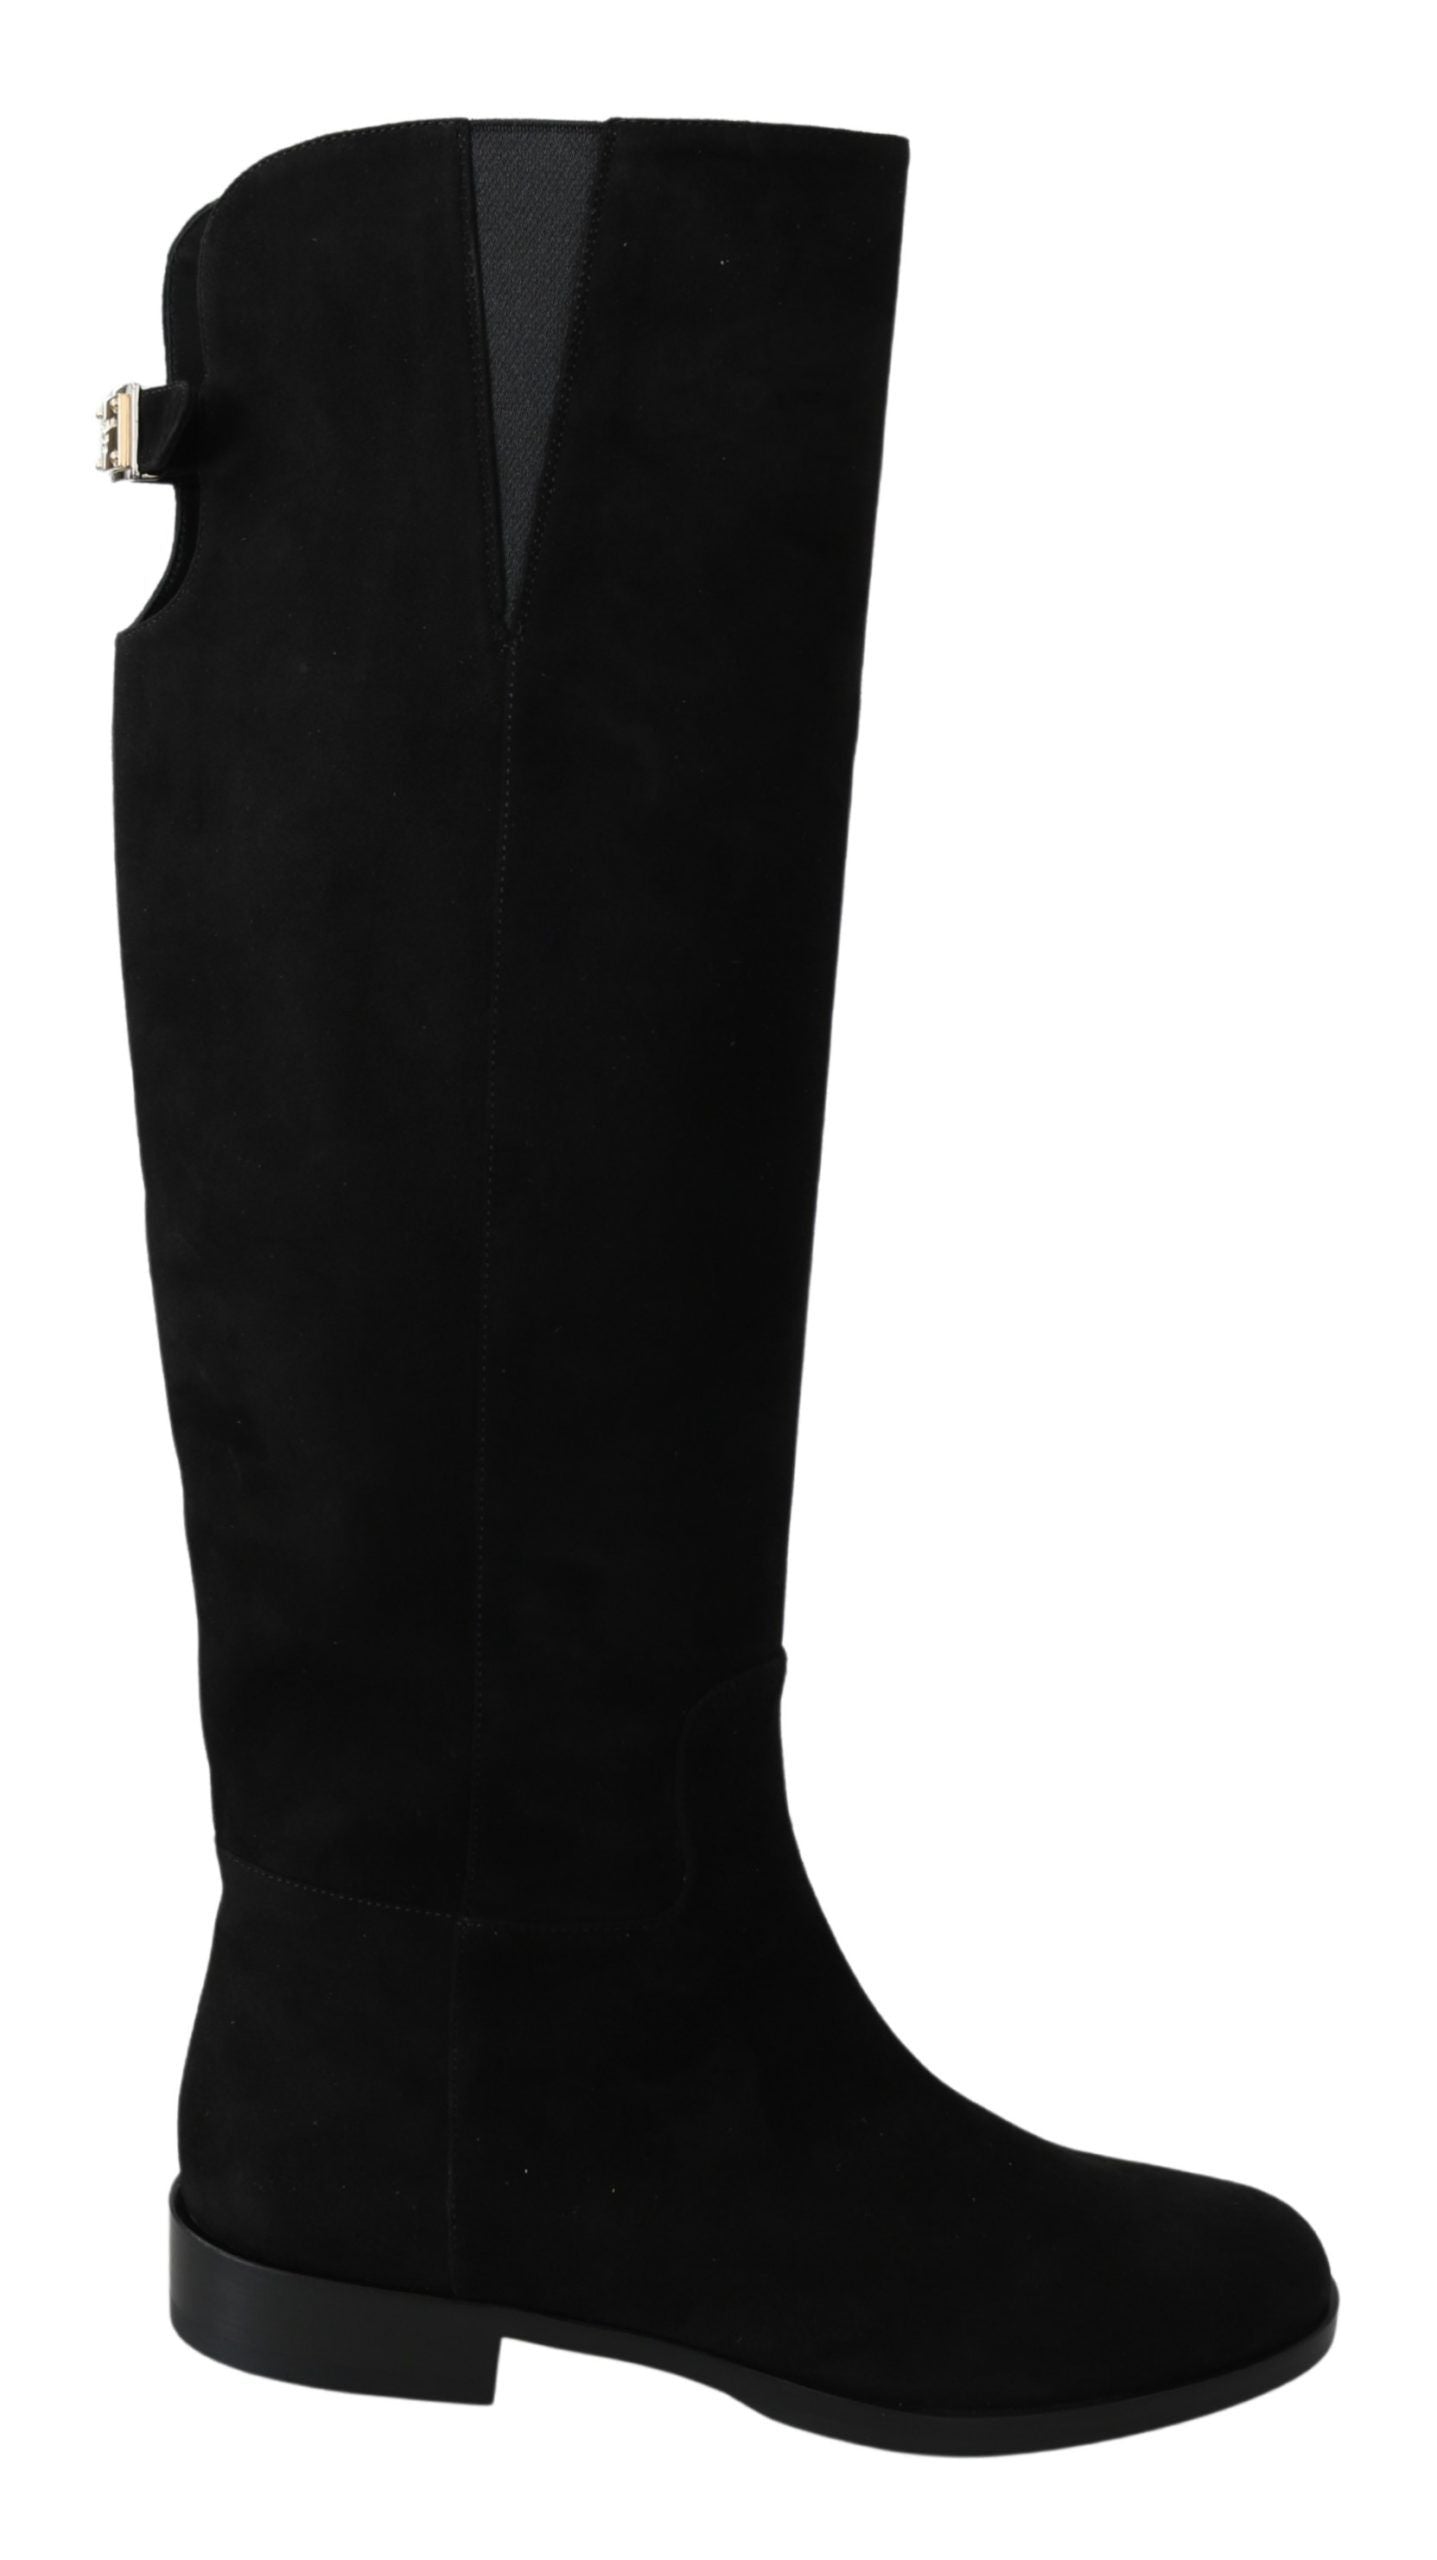 Black Suede Knee High Flat Boots Shoes - Designed by Dolce & Gabbana Available to Buy at a Discounted Price on Moon Behind The Hill Online Designer Discount Store